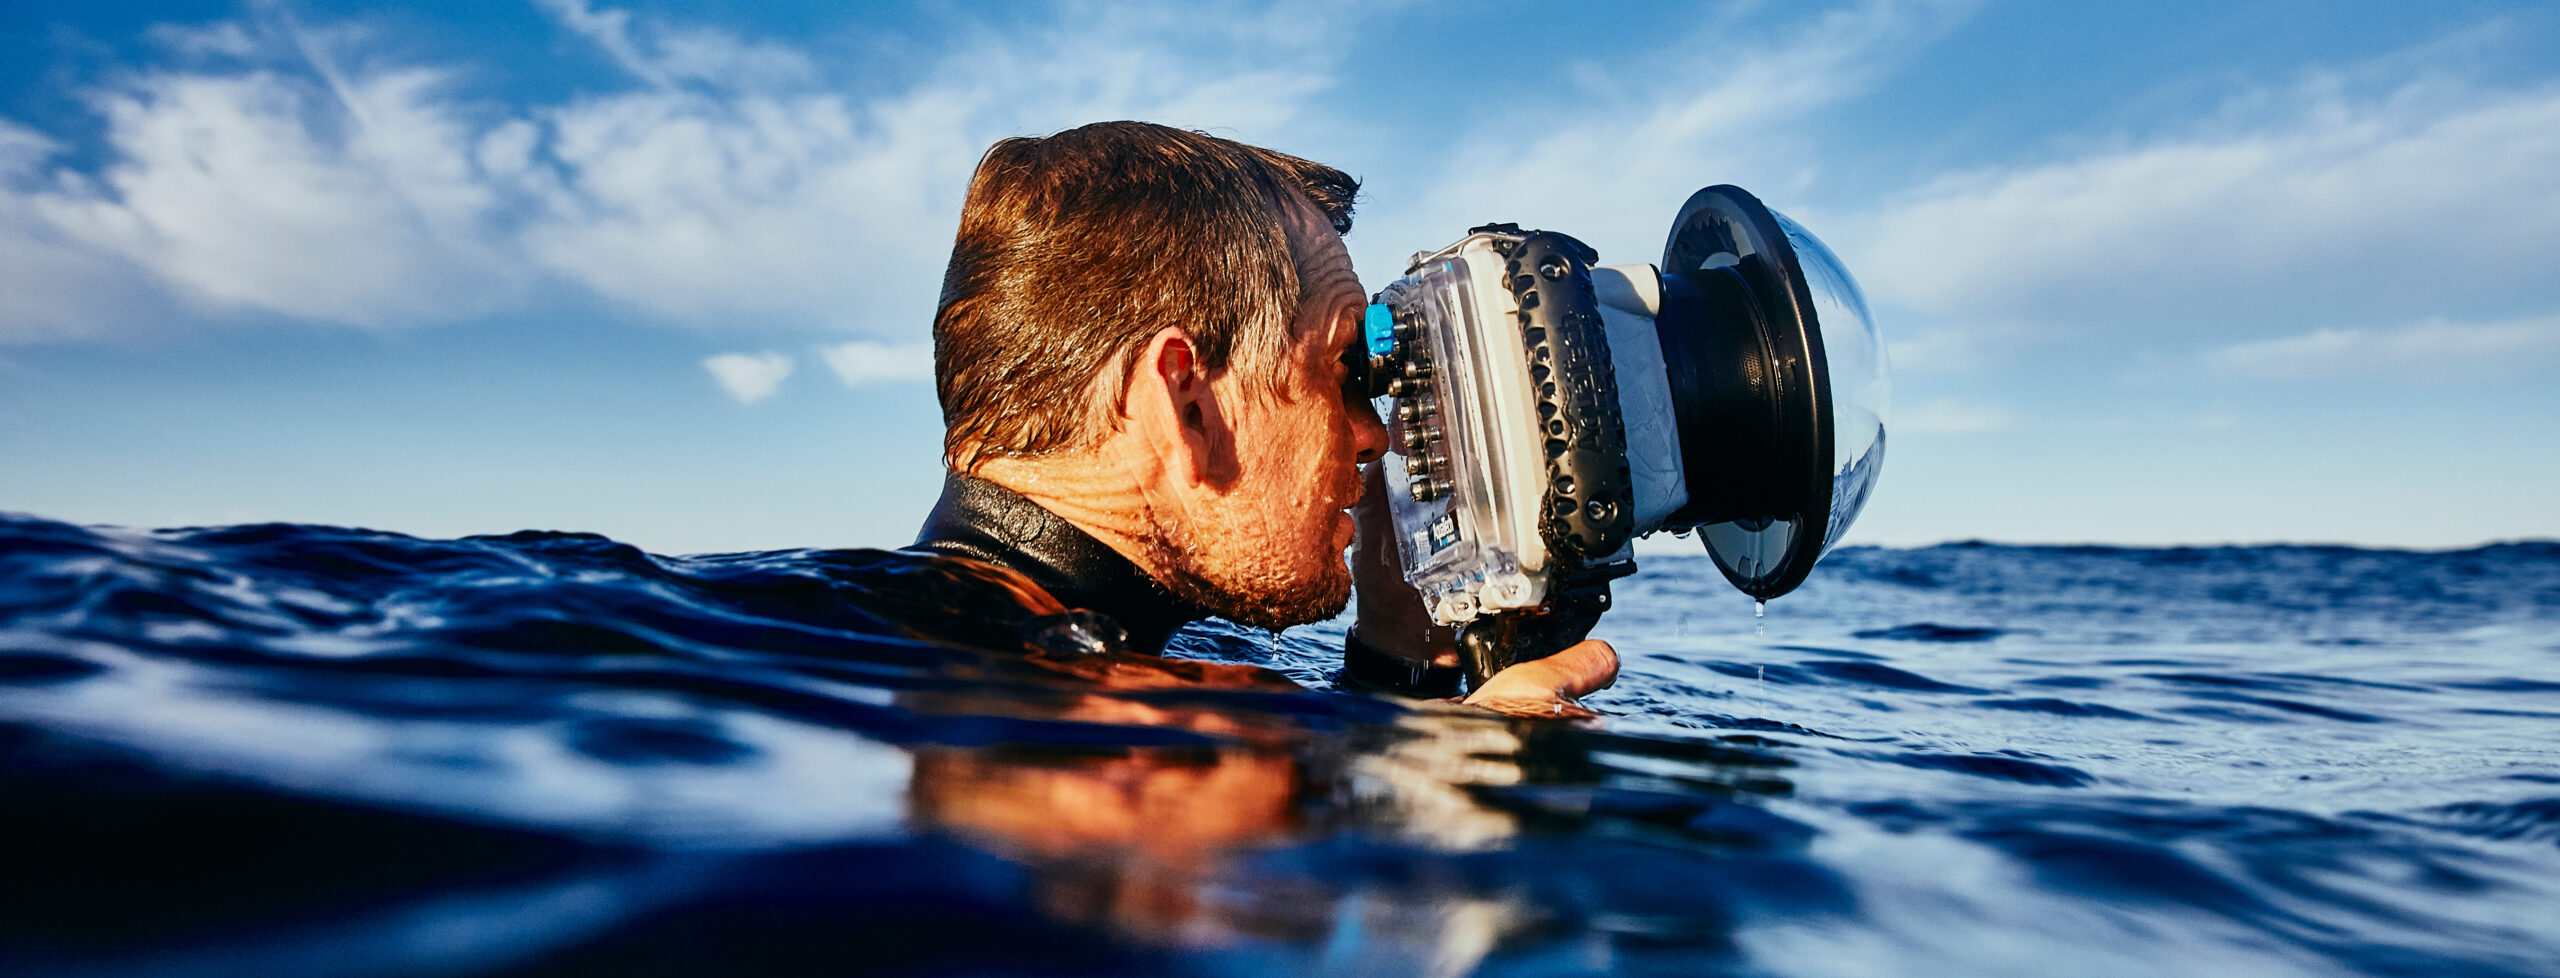 diver testing waterproof camera housing product developed by Inova Design